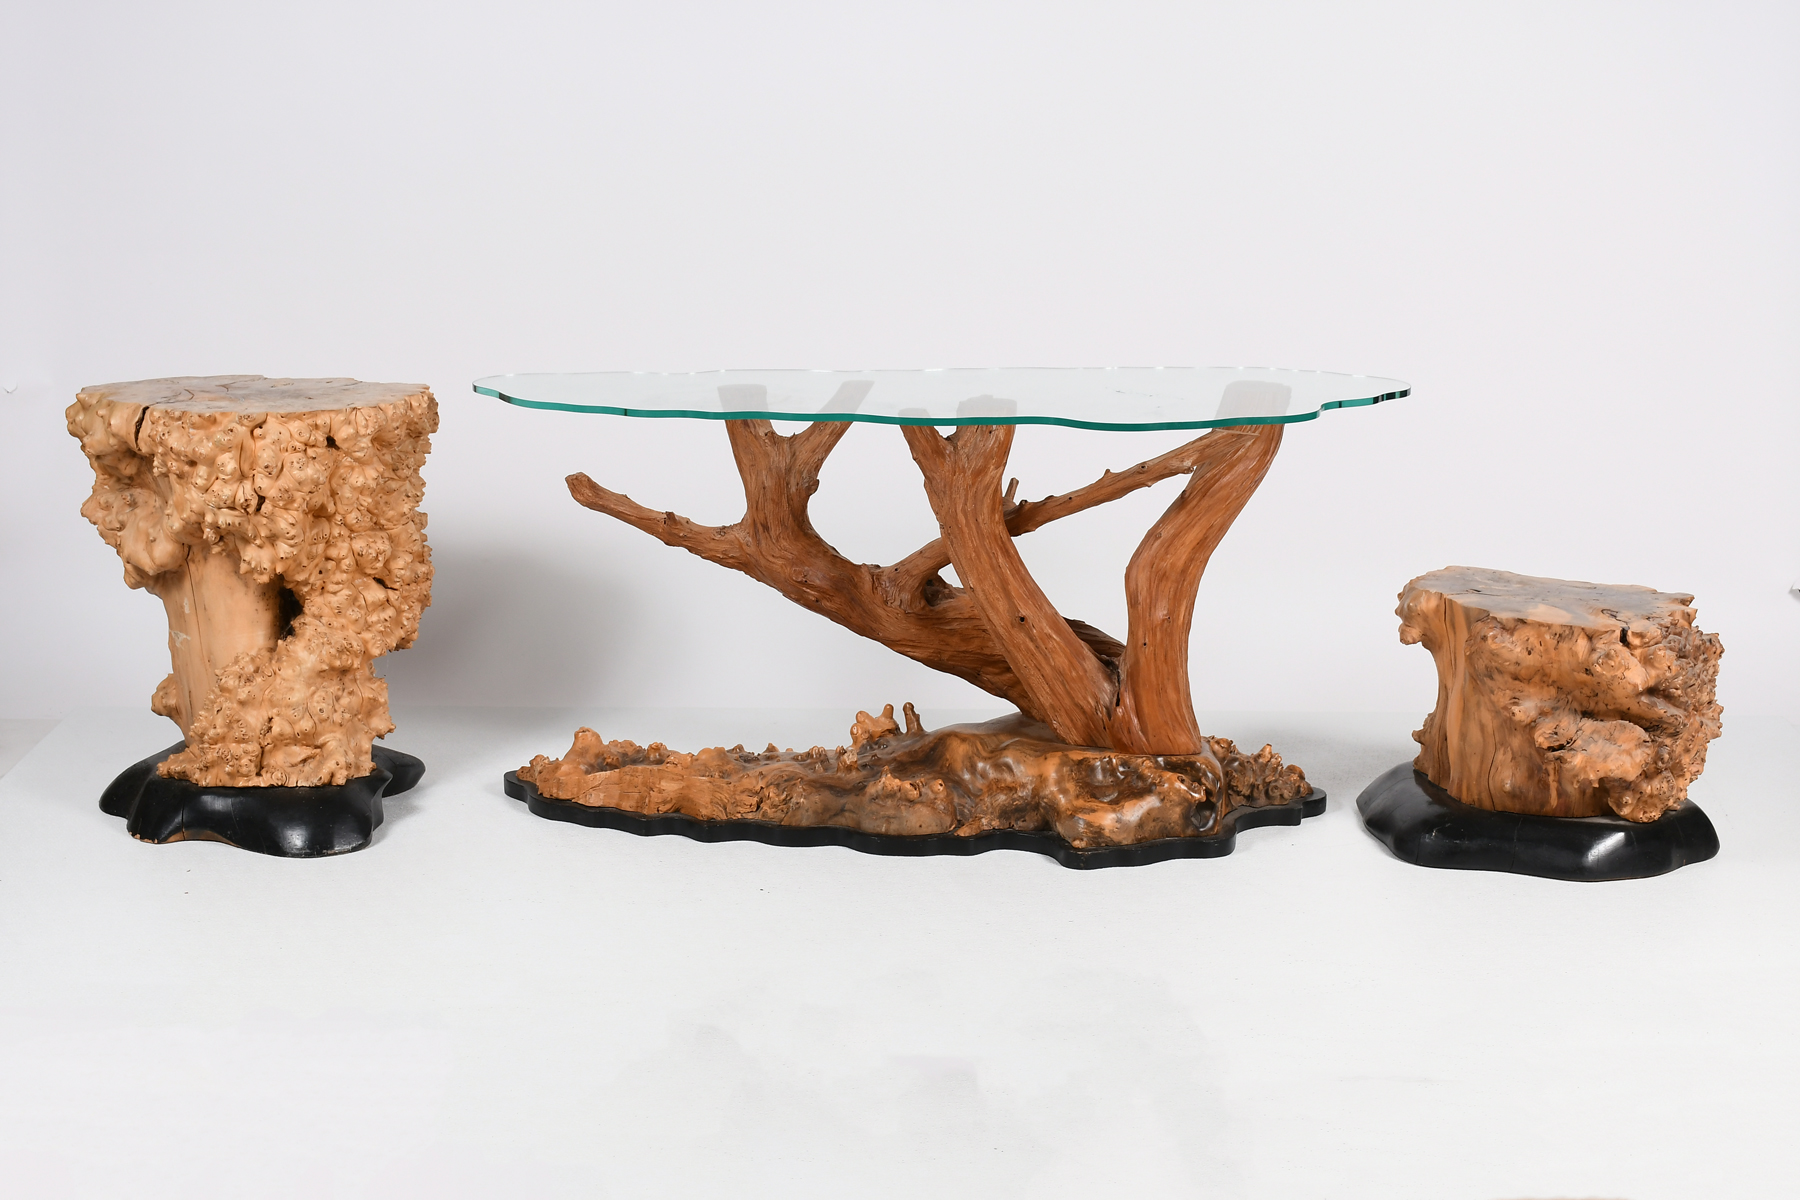 3 CYPRESS ROOT TABLES: Includes